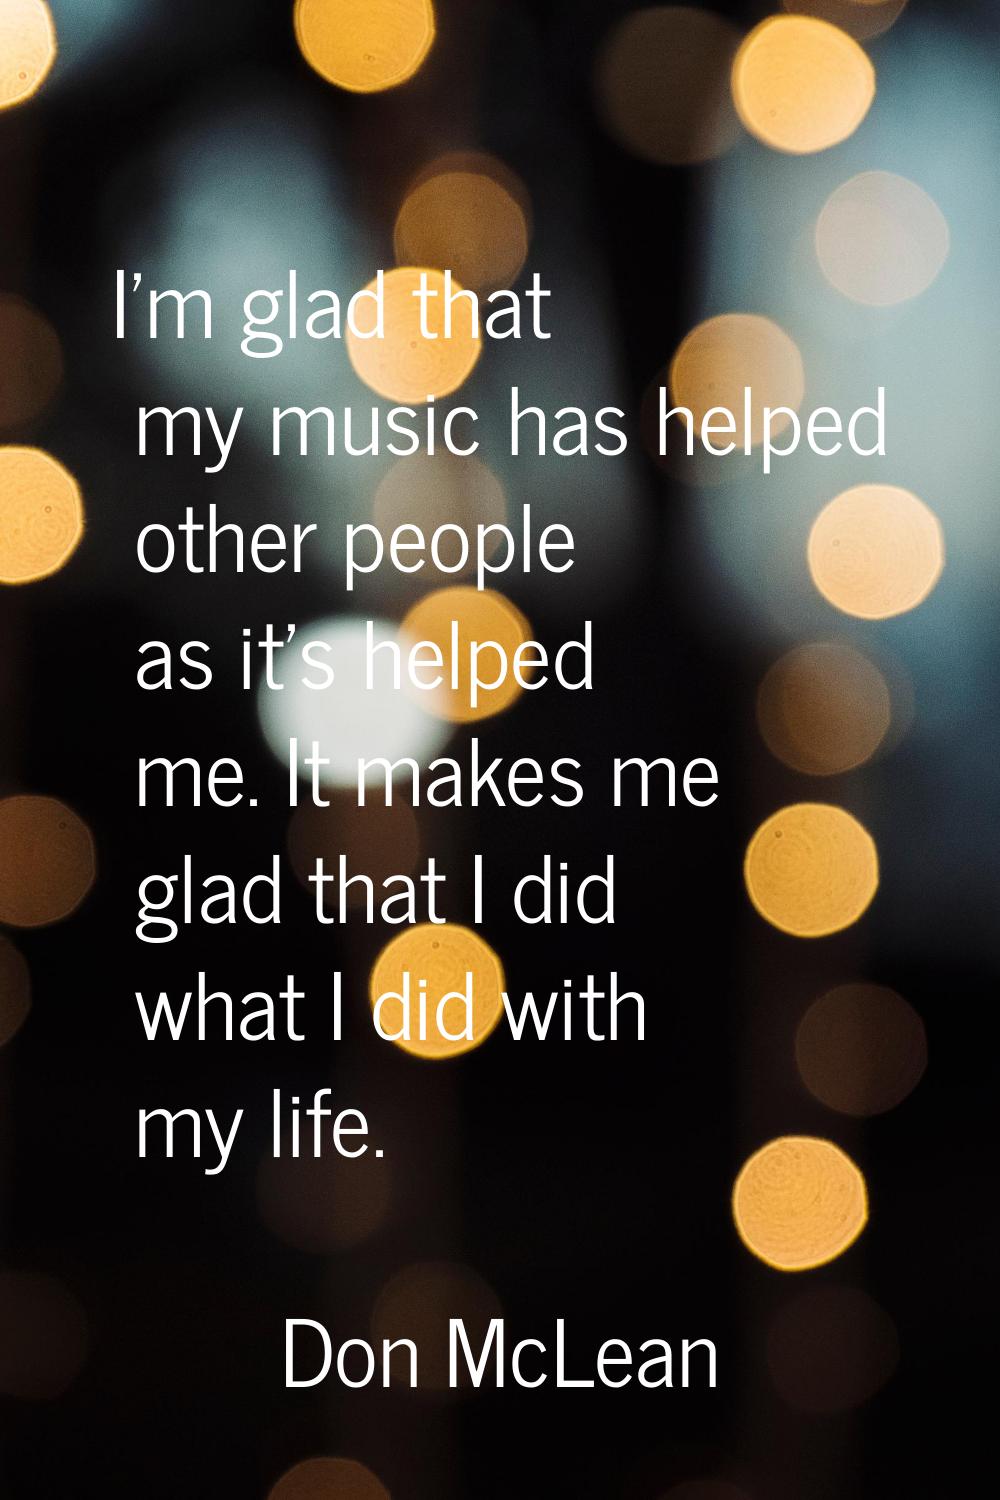 I'm glad that my music has helped other people as it's helped me. It makes me glad that I did what 